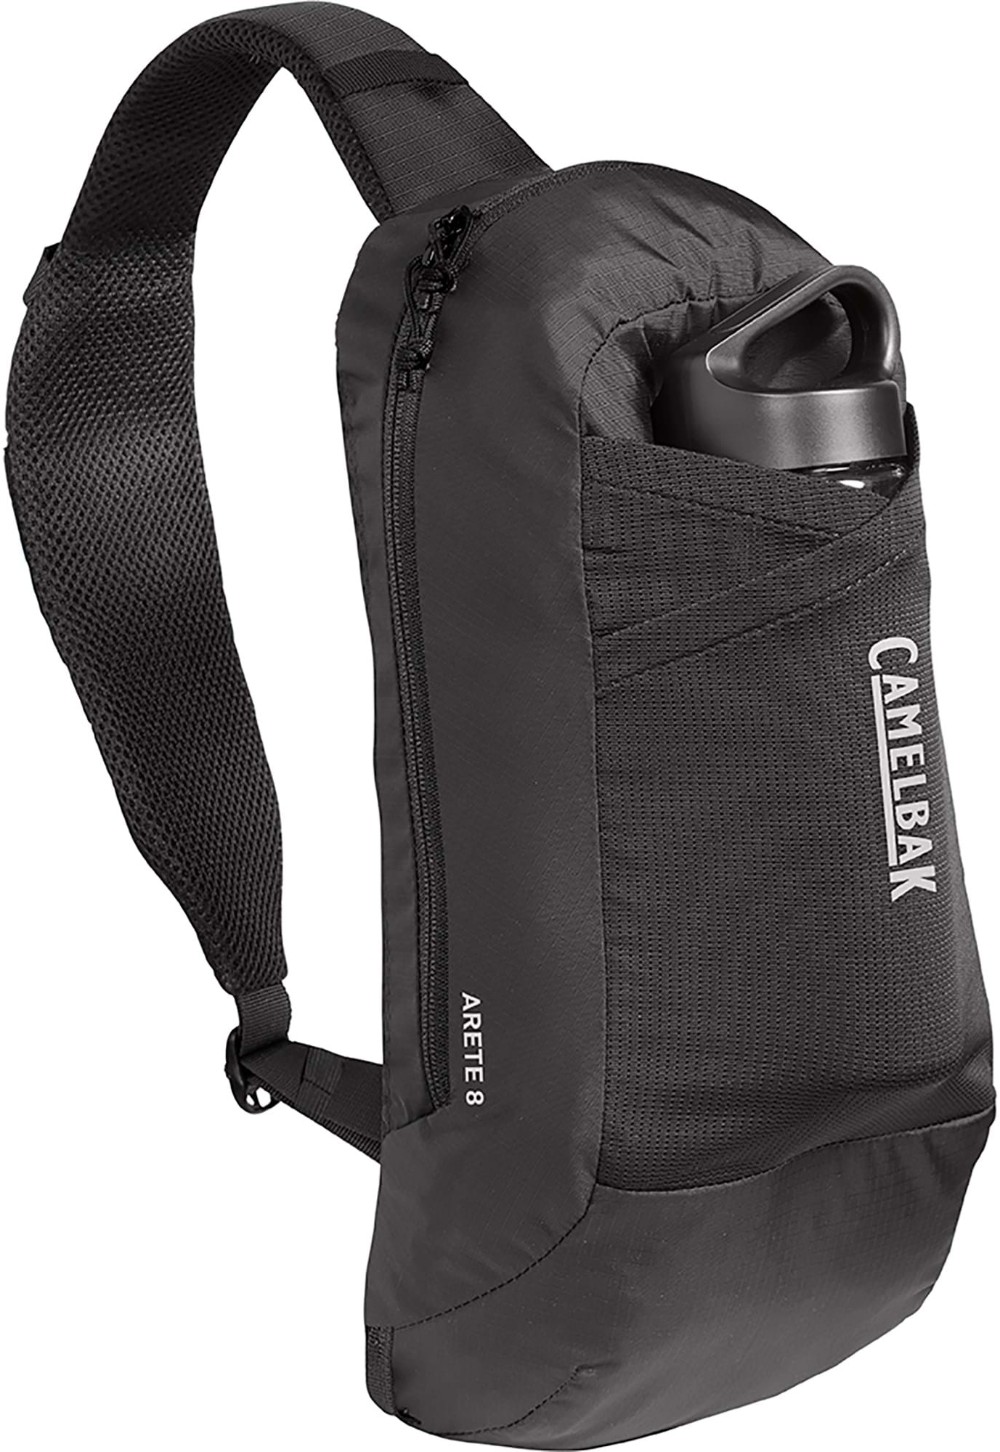 Arete Sling 8L Hydration Pack with 600ml Carry Cap Bottle image 0